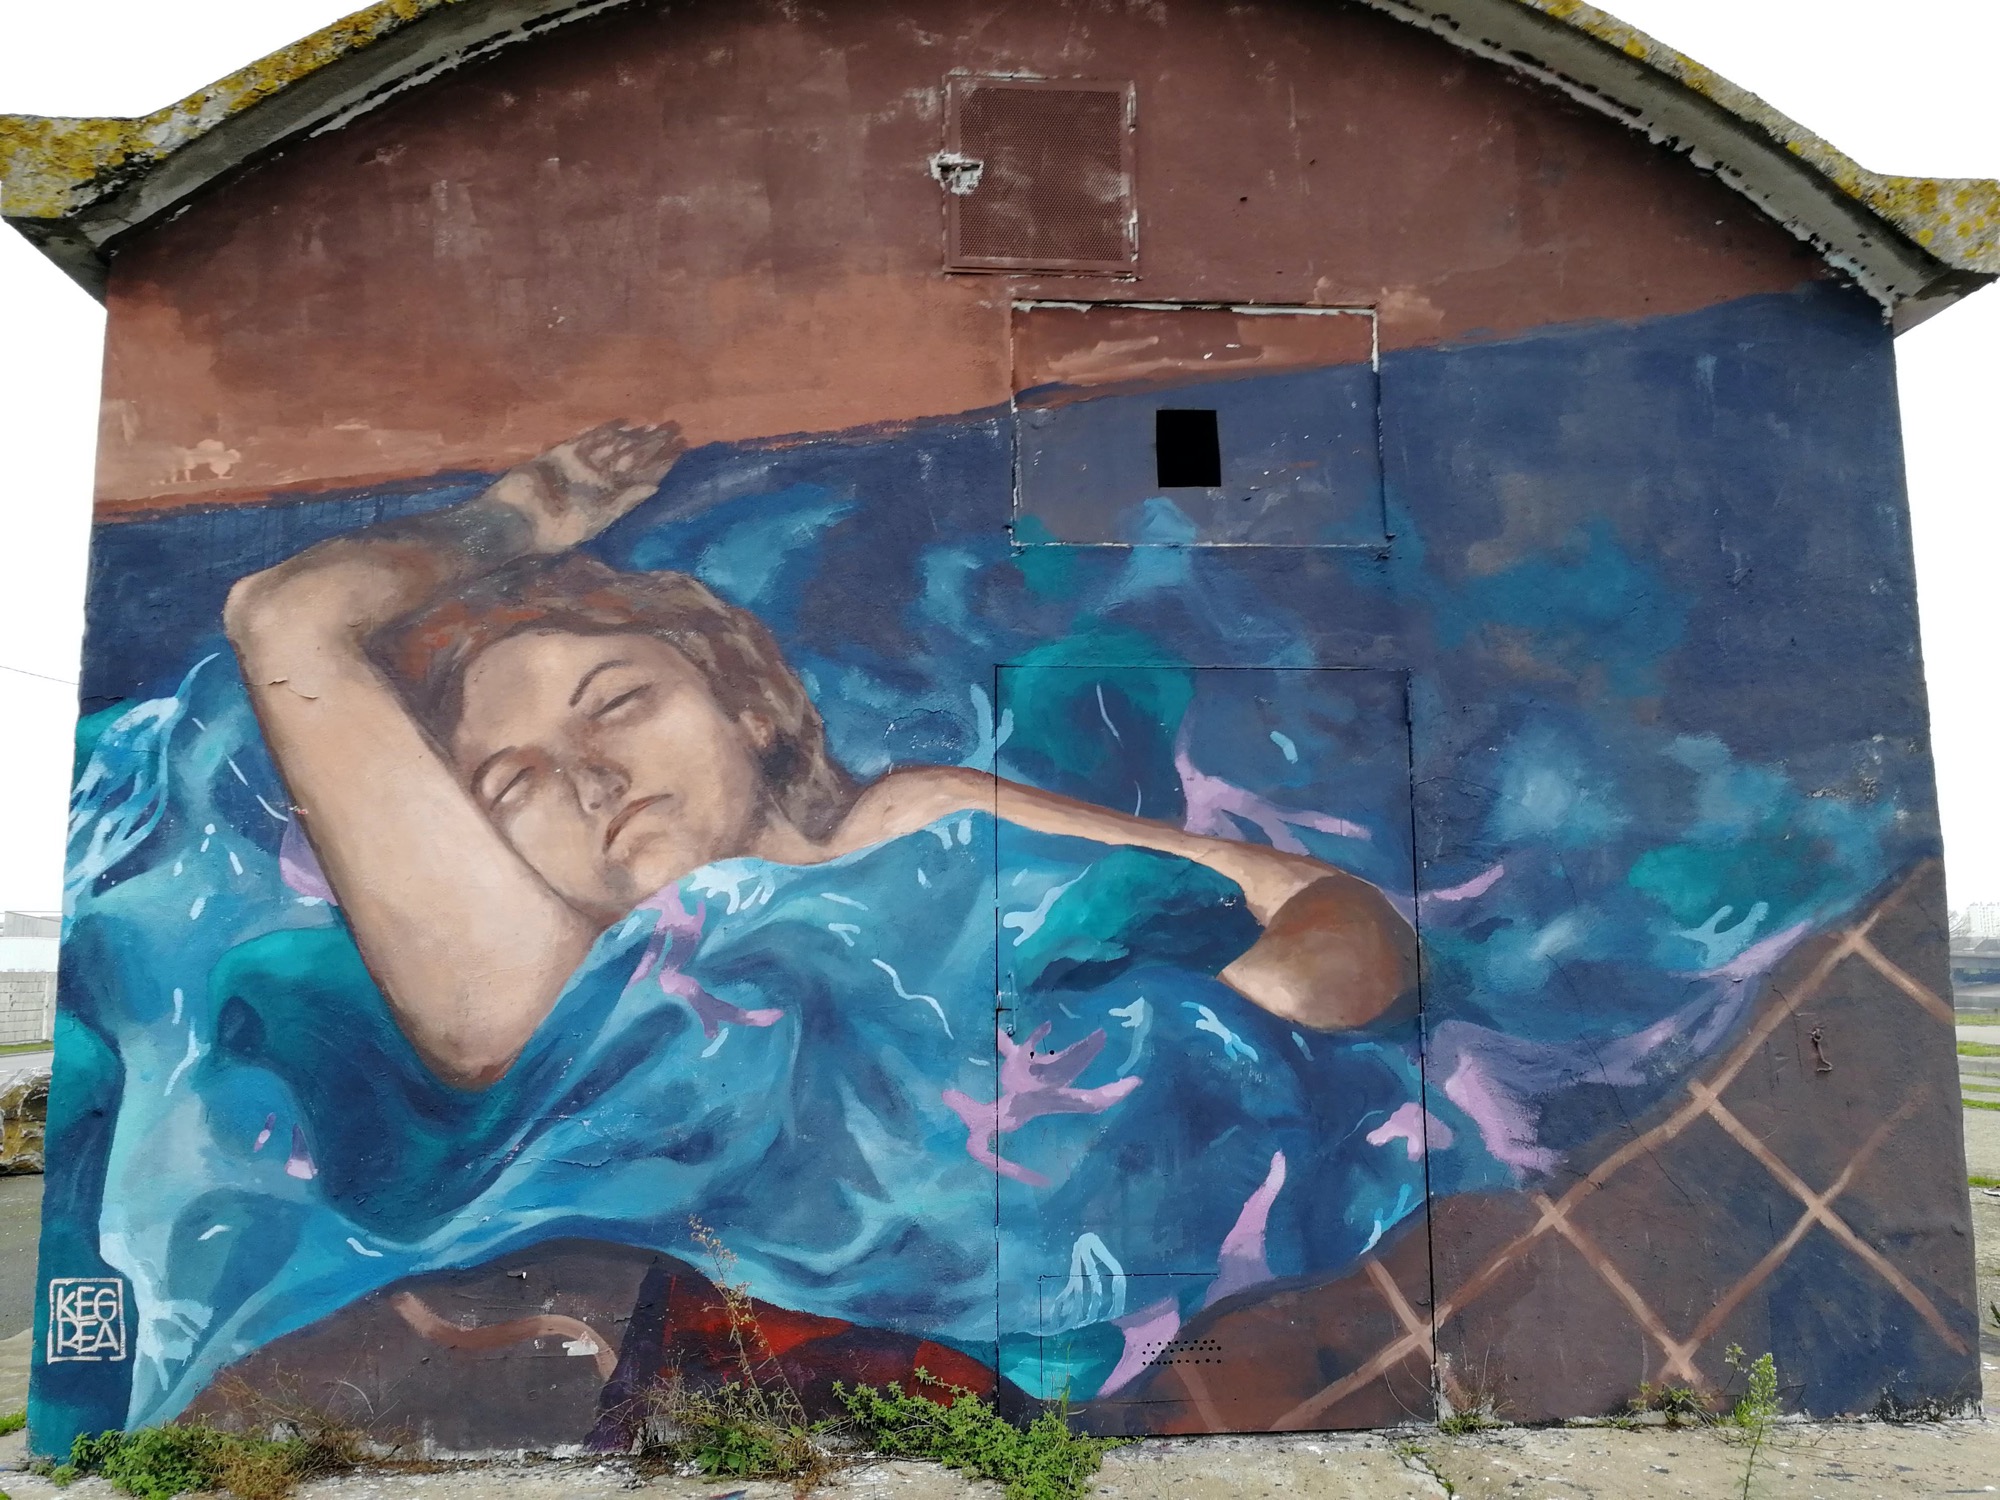 Graffiti 584  by the artist Kegrea captured by Rabot in Nantes France